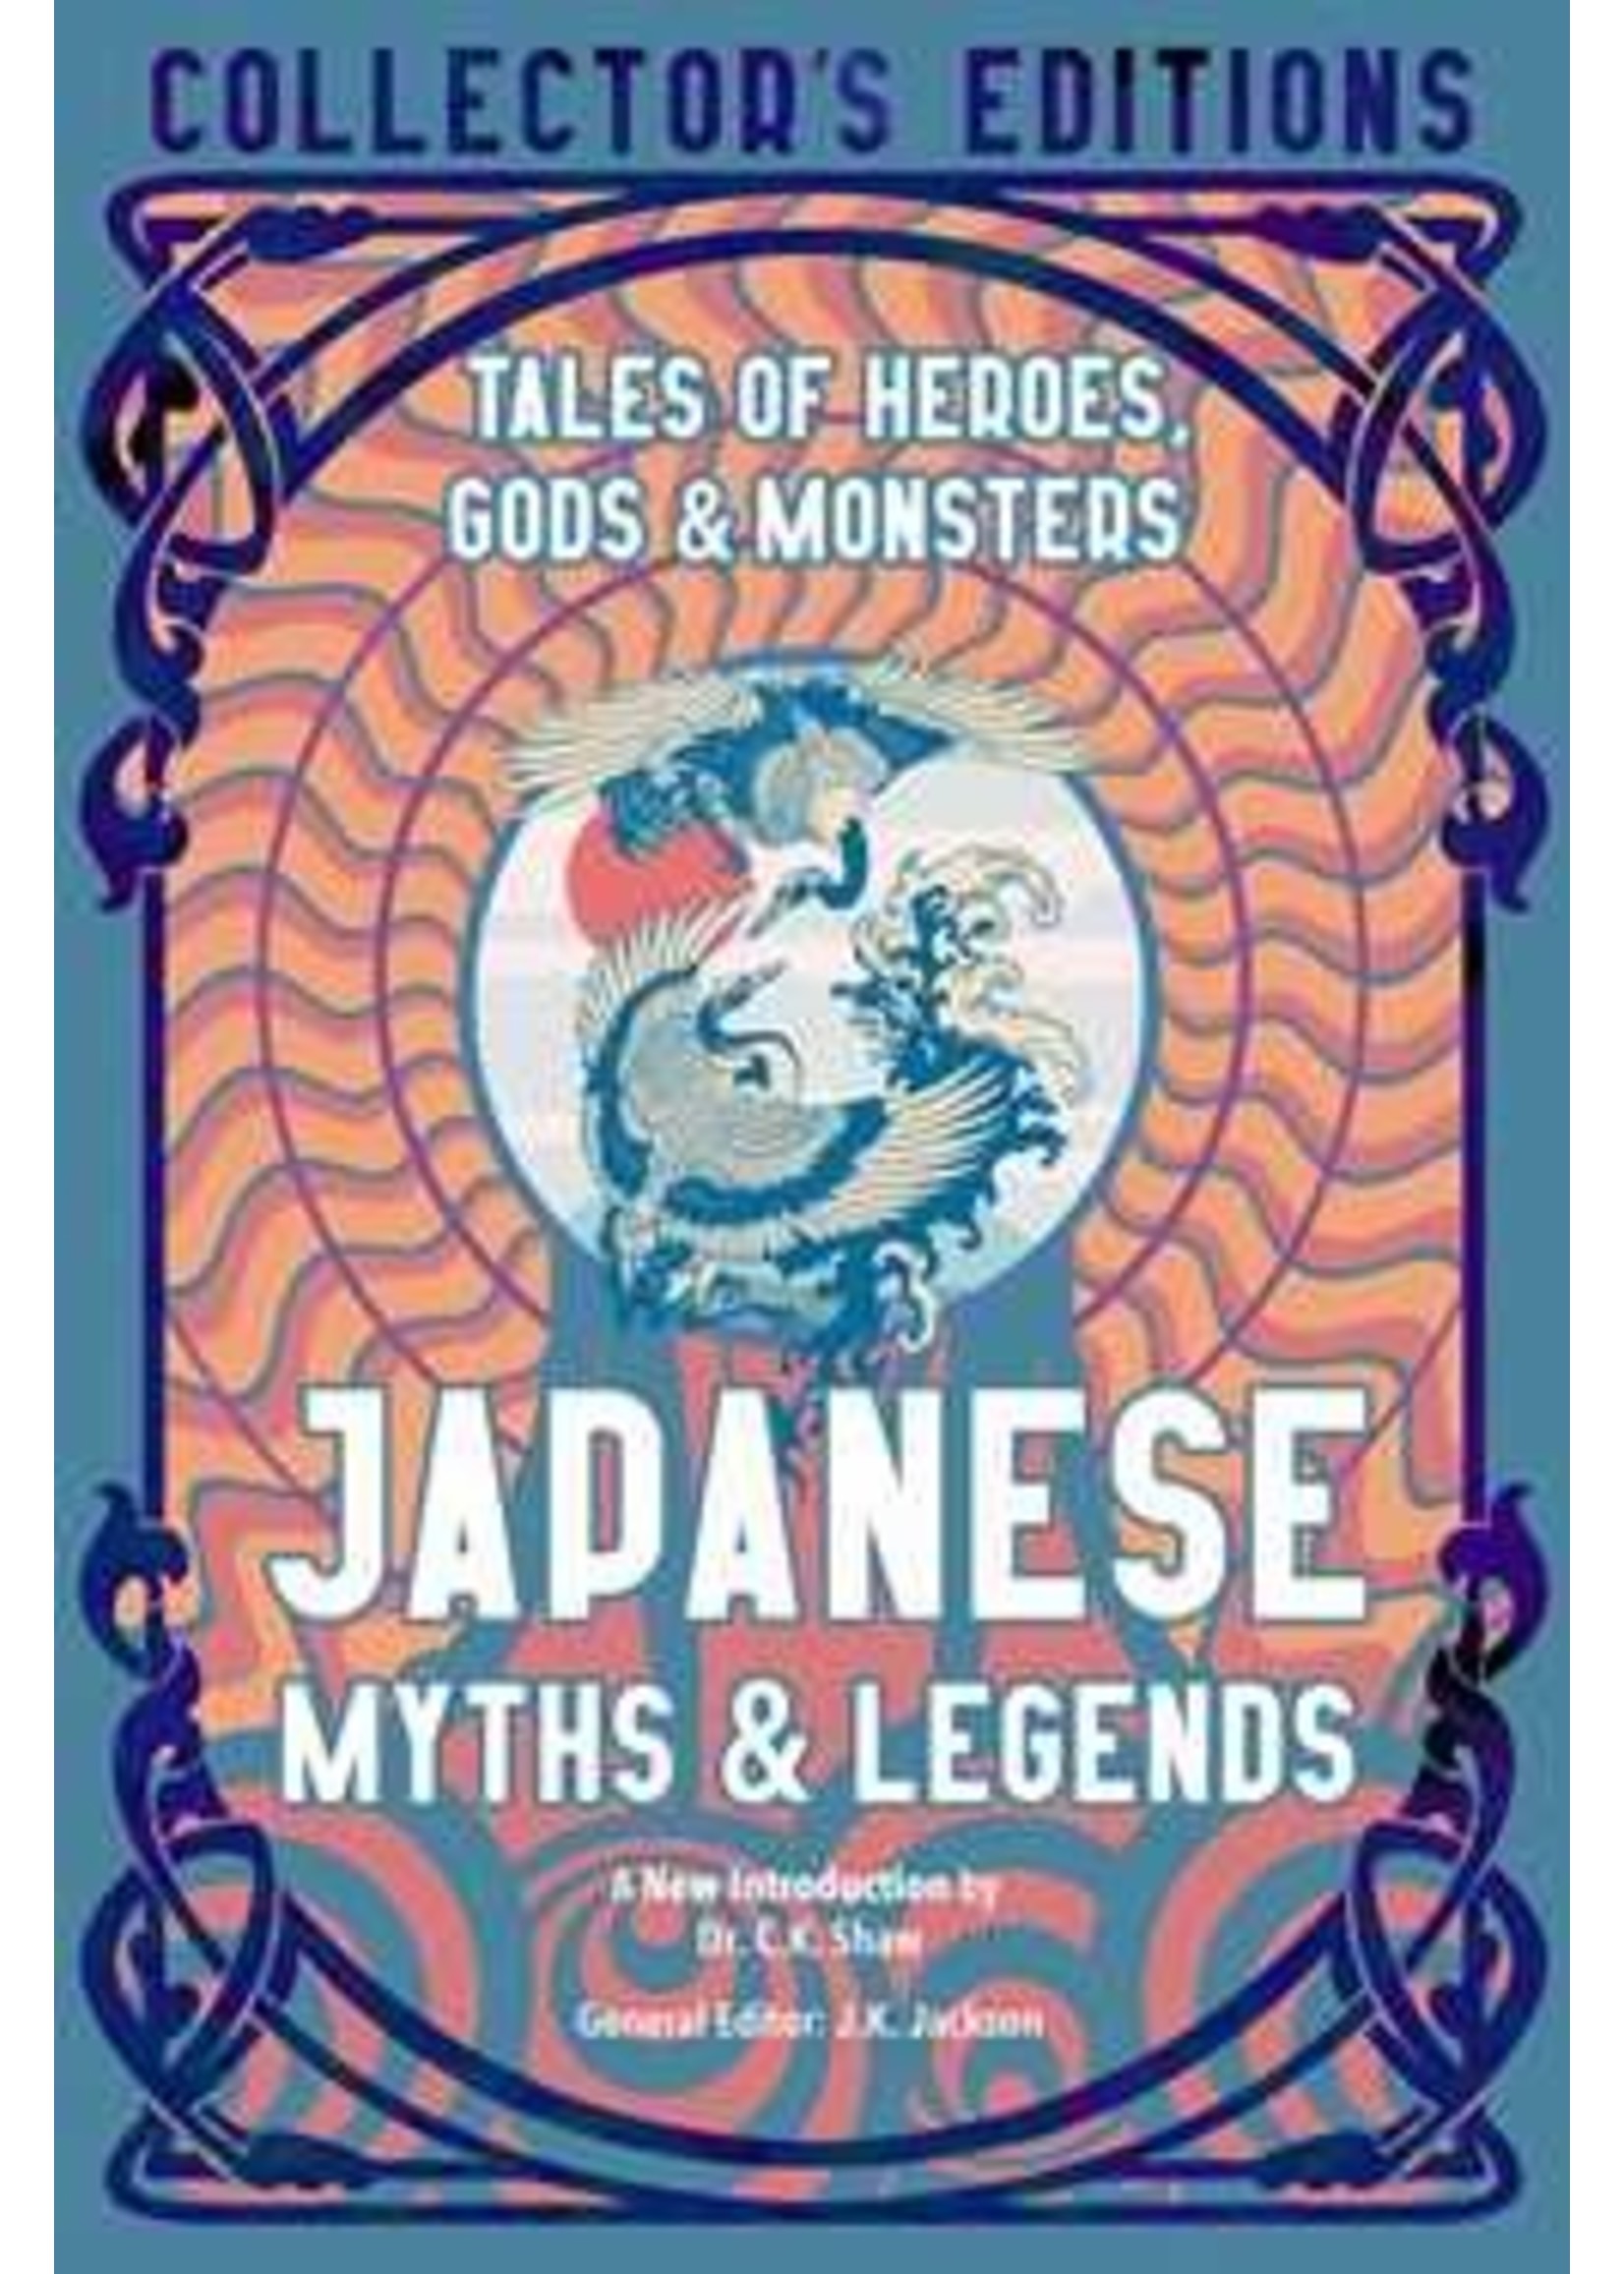 Japanese Myths & Legends: Tales of Heroes, Gods & Monsters by J. K. Jackson